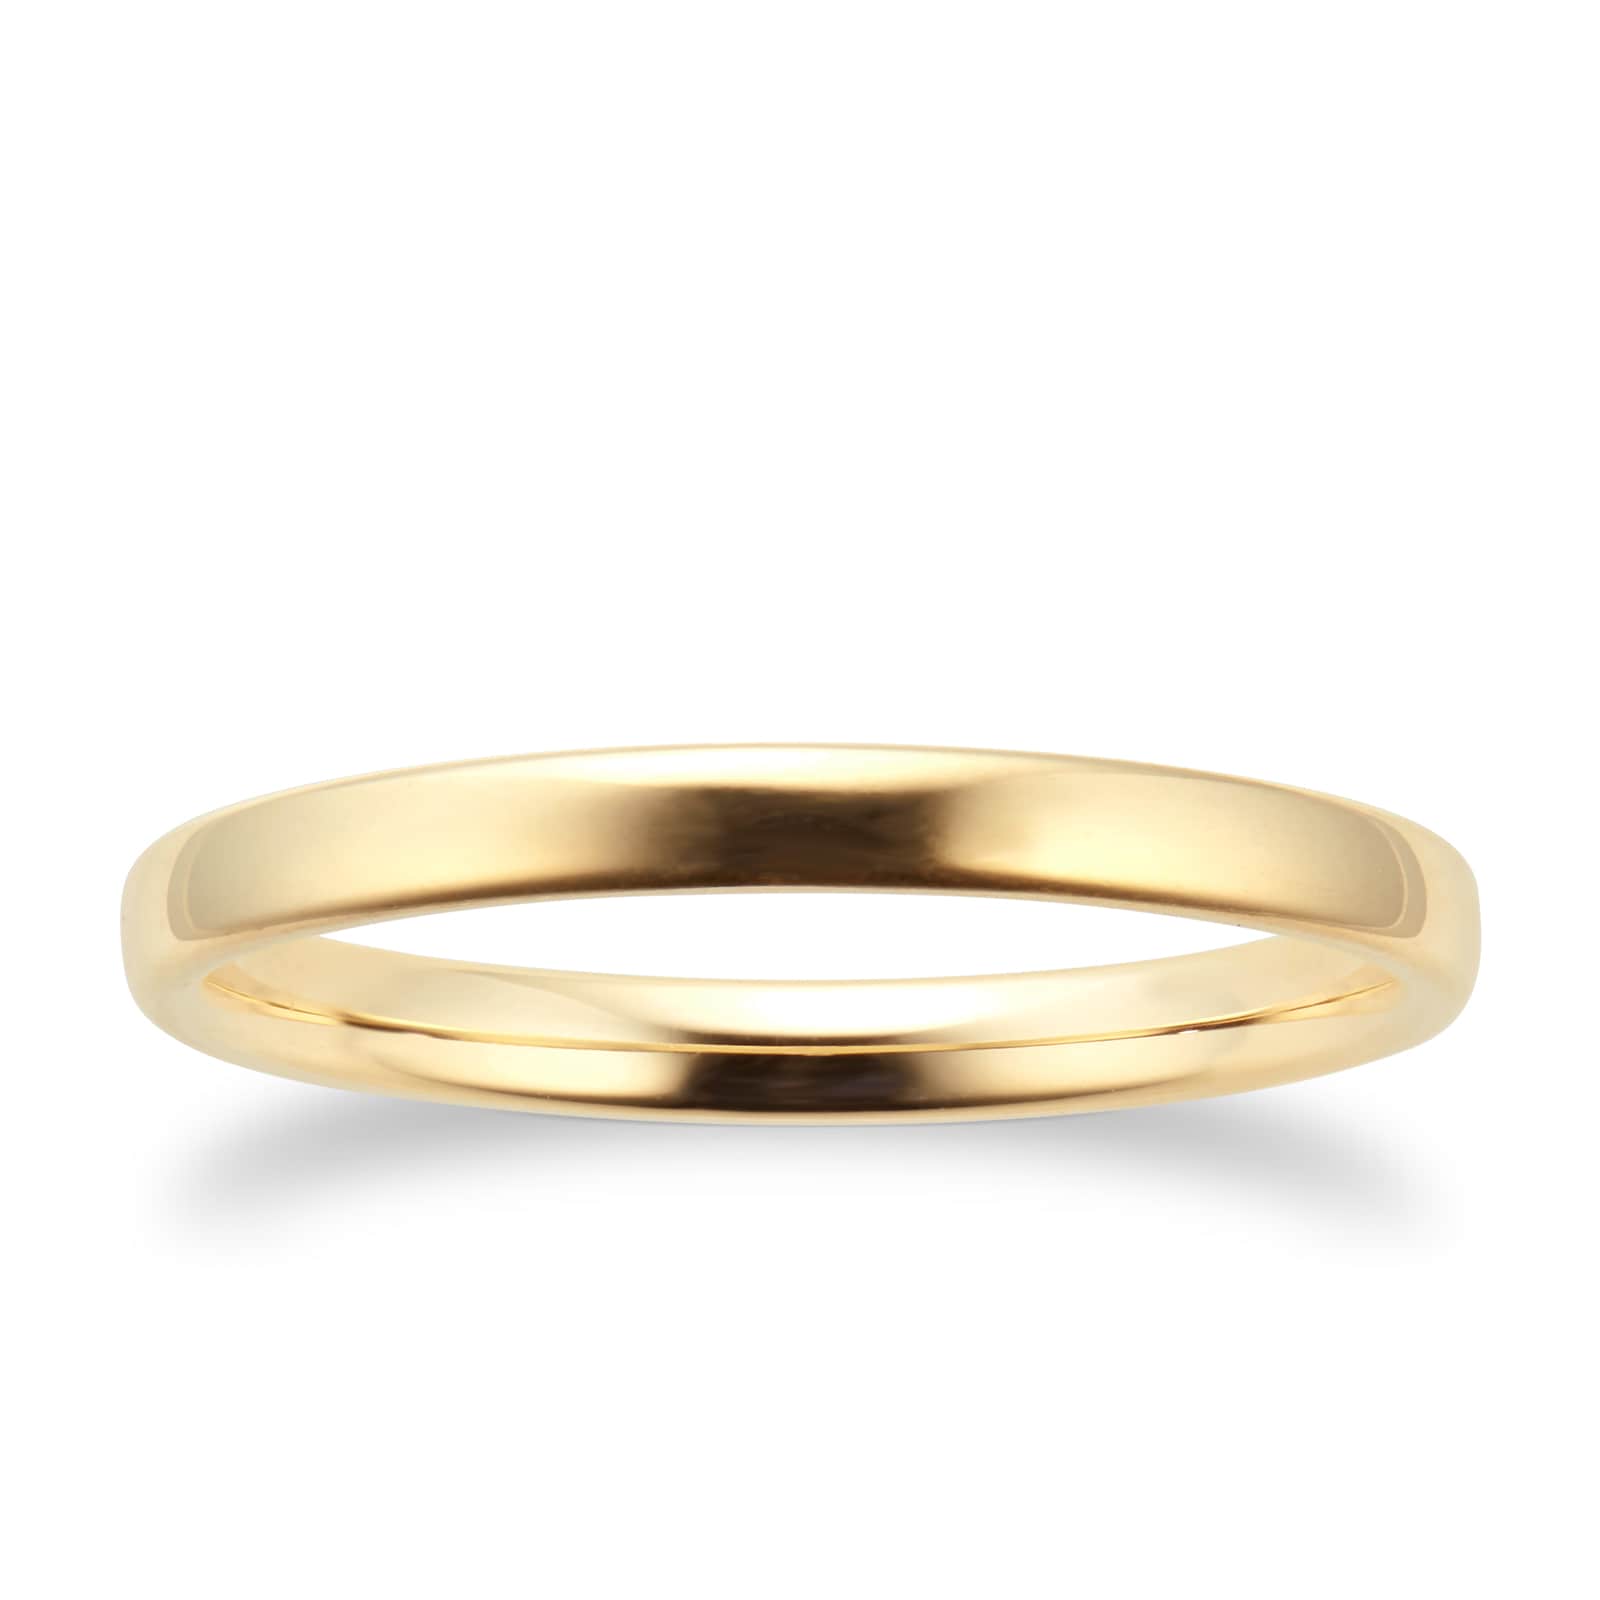 2mm Slight Court Standard Wedding Ring In 9 Carat Yellow Gold Ring Size O